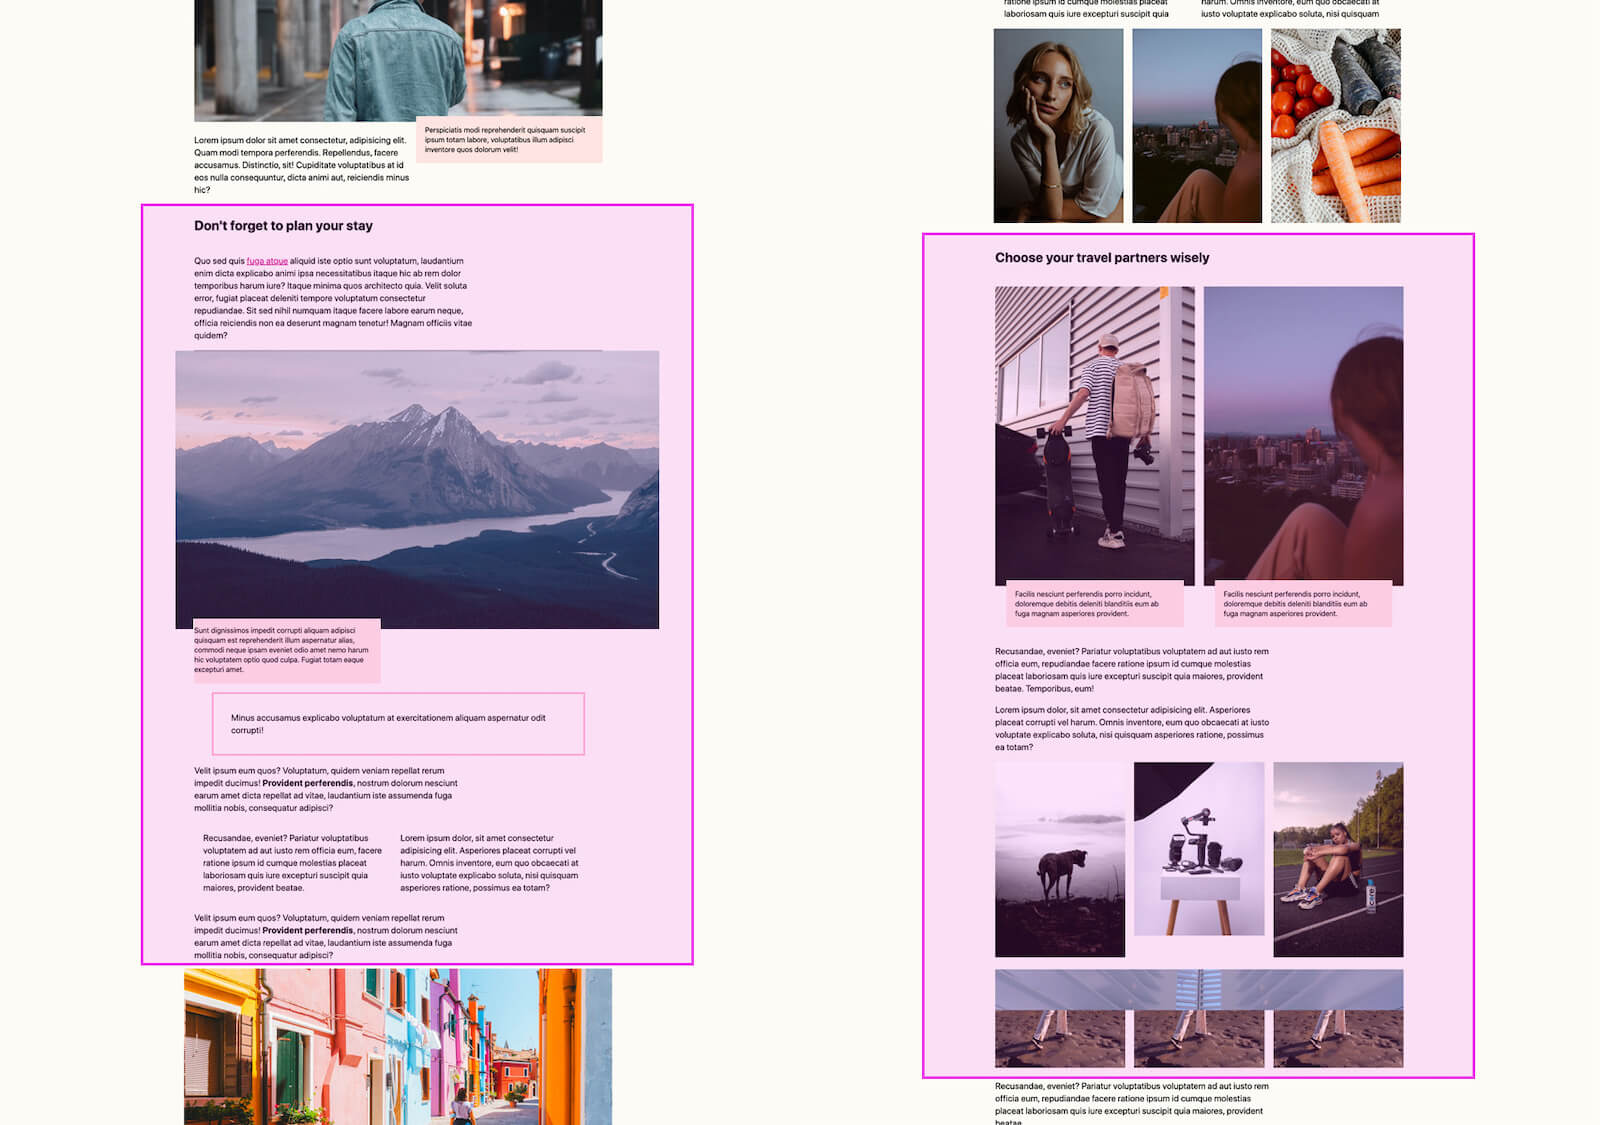 An annotated screenshot of chunking content into sections with a CSS class.